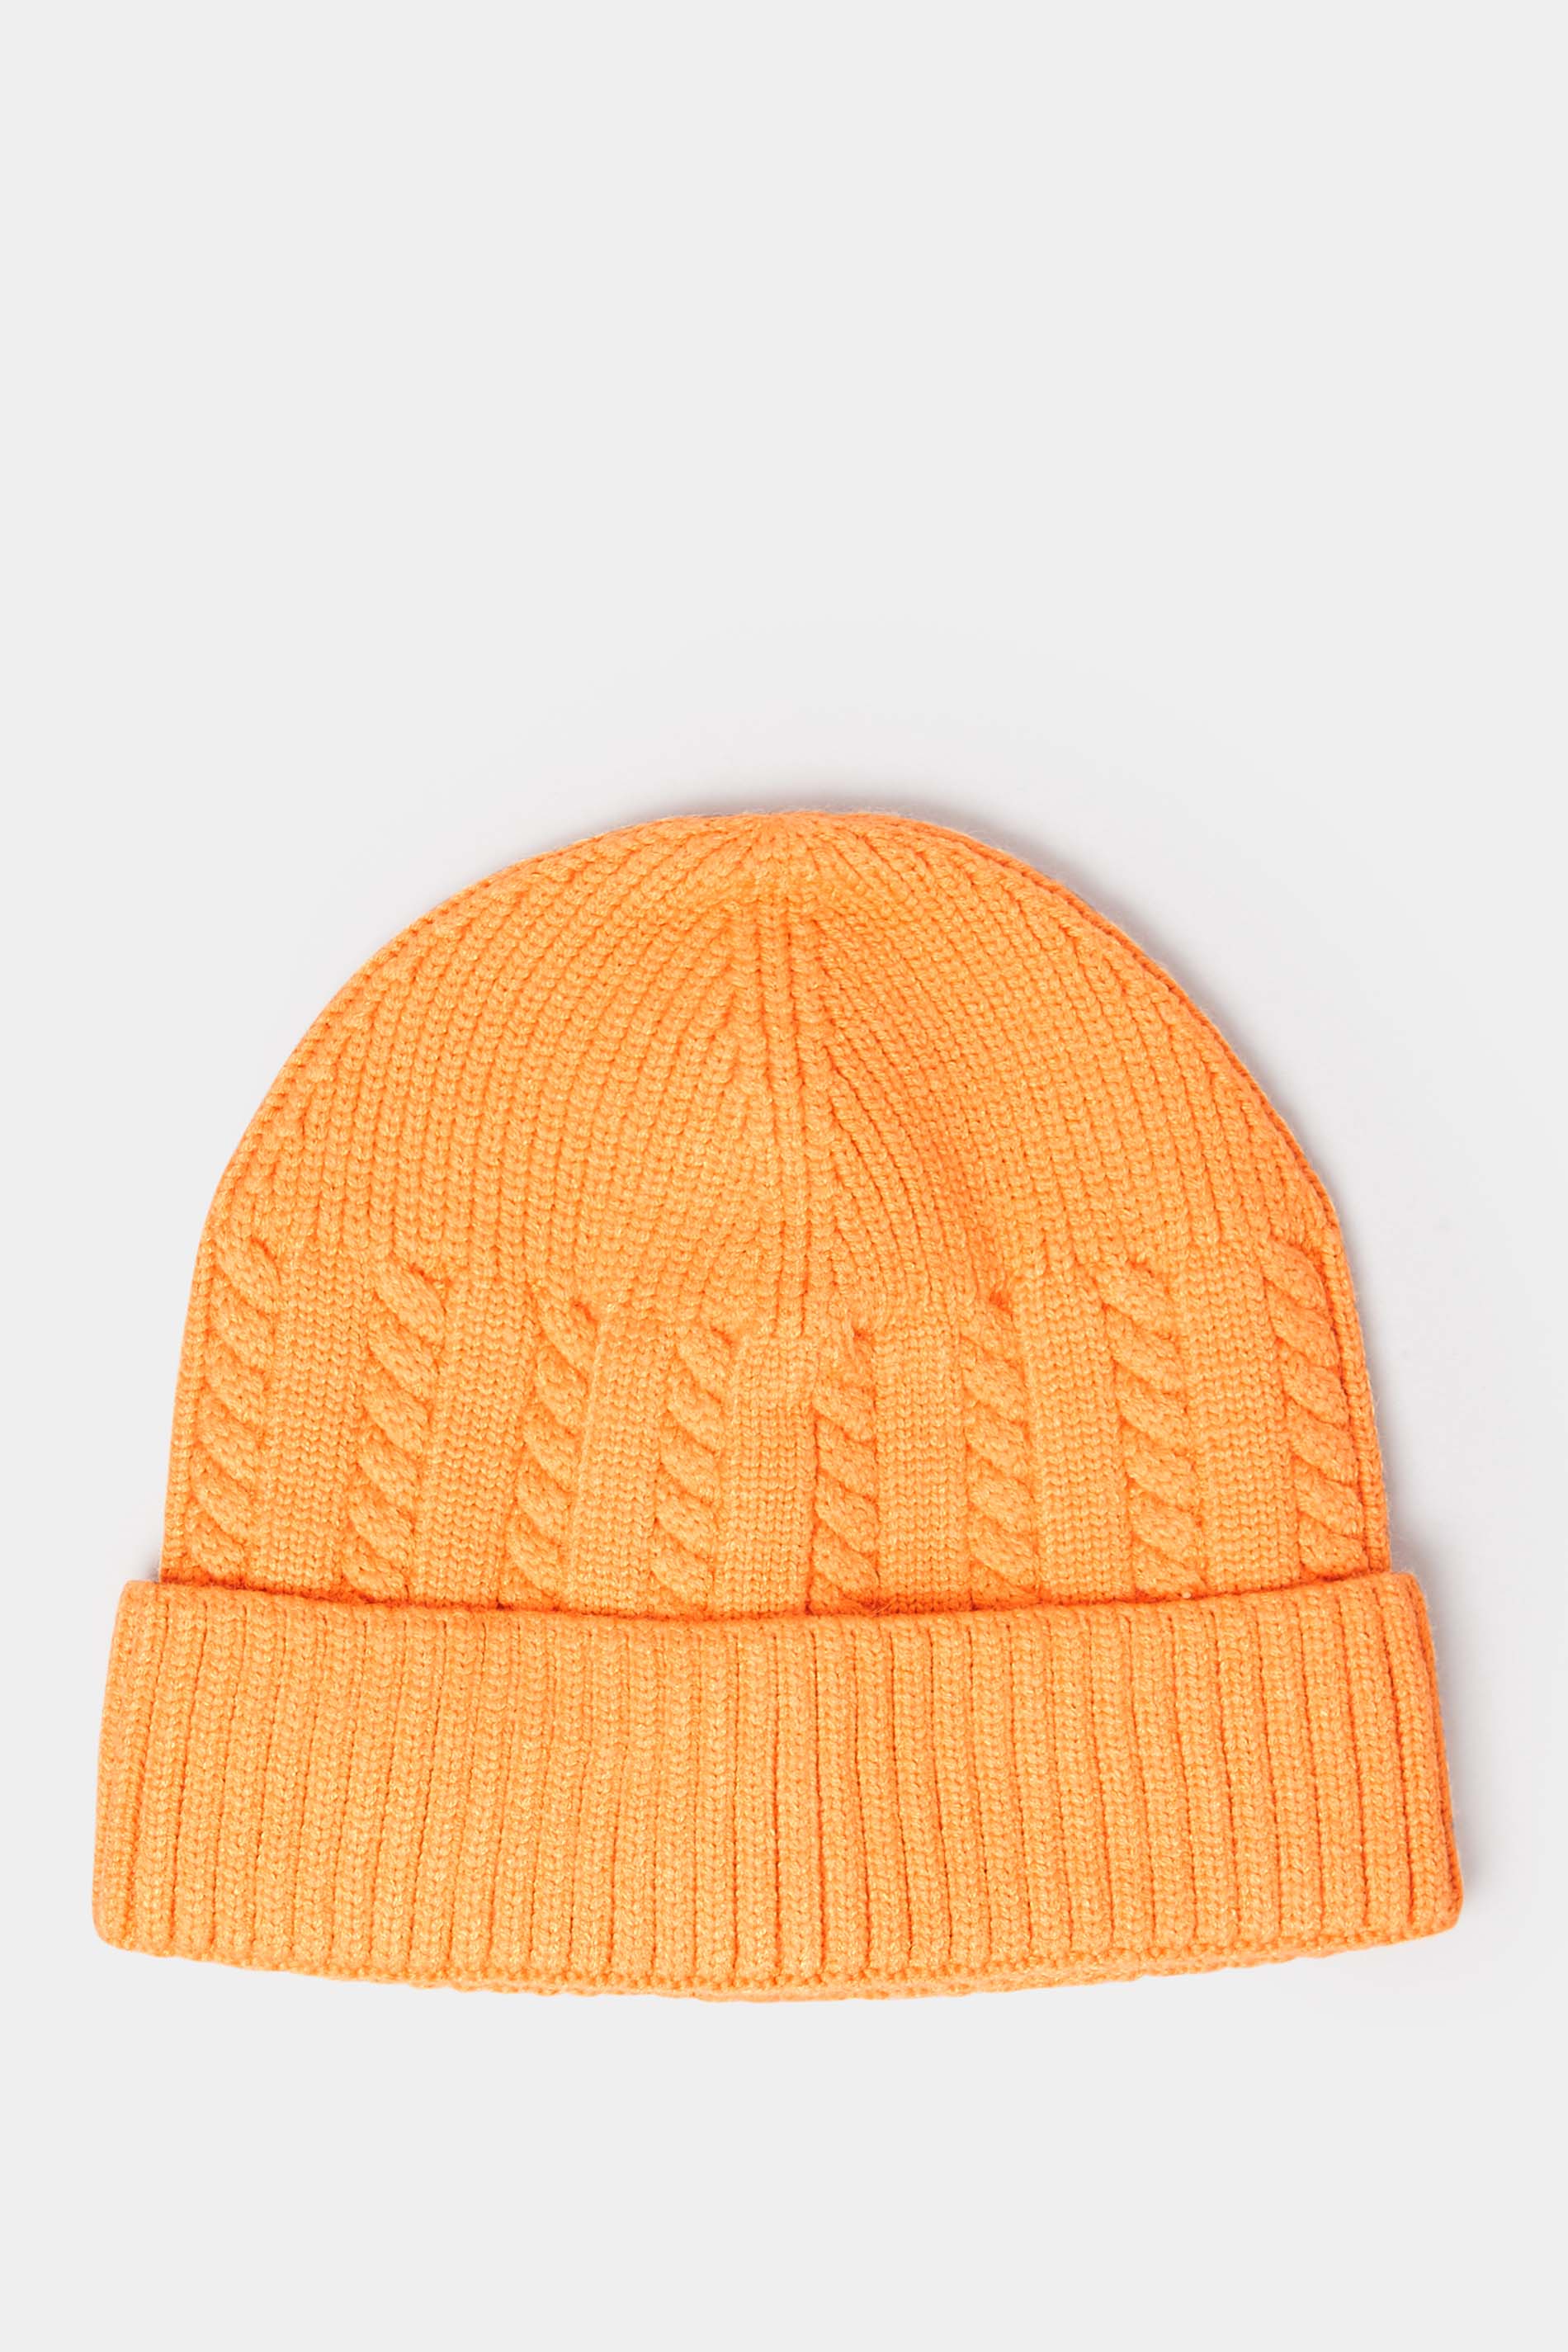 Bright Orange Cable Knit Beanie Hat | Yours Clothing 2